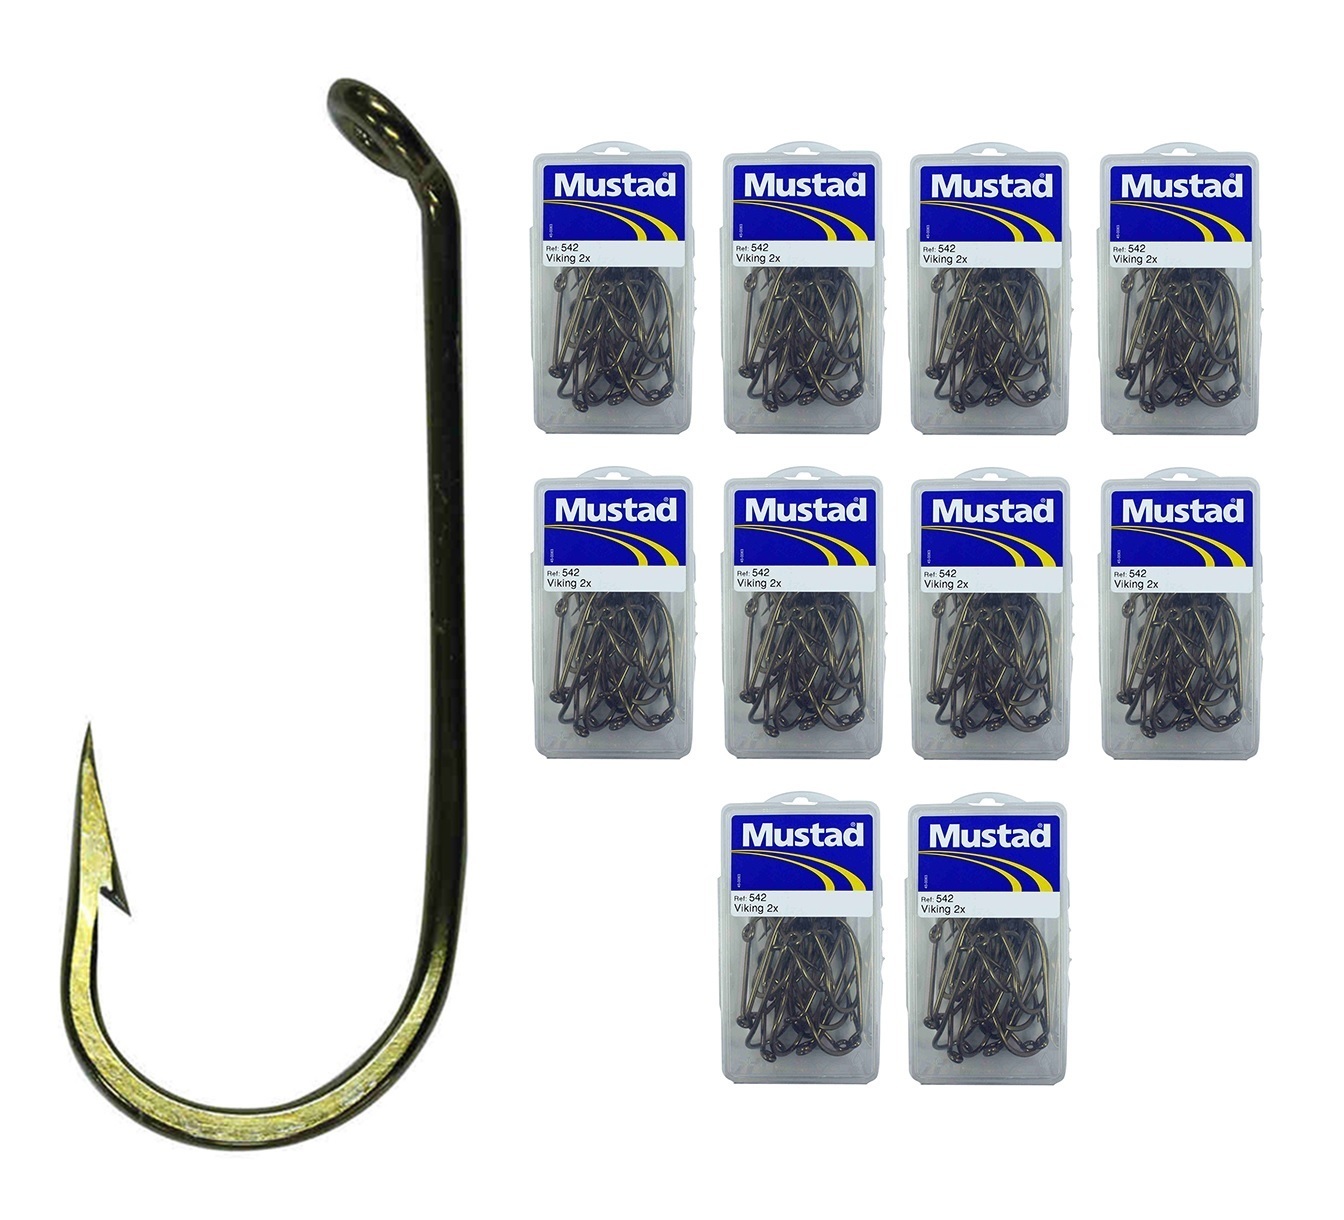 10 Boxes of Mustad Bronze French Viking 2x Strong Fishing Hooks - Size 2/0